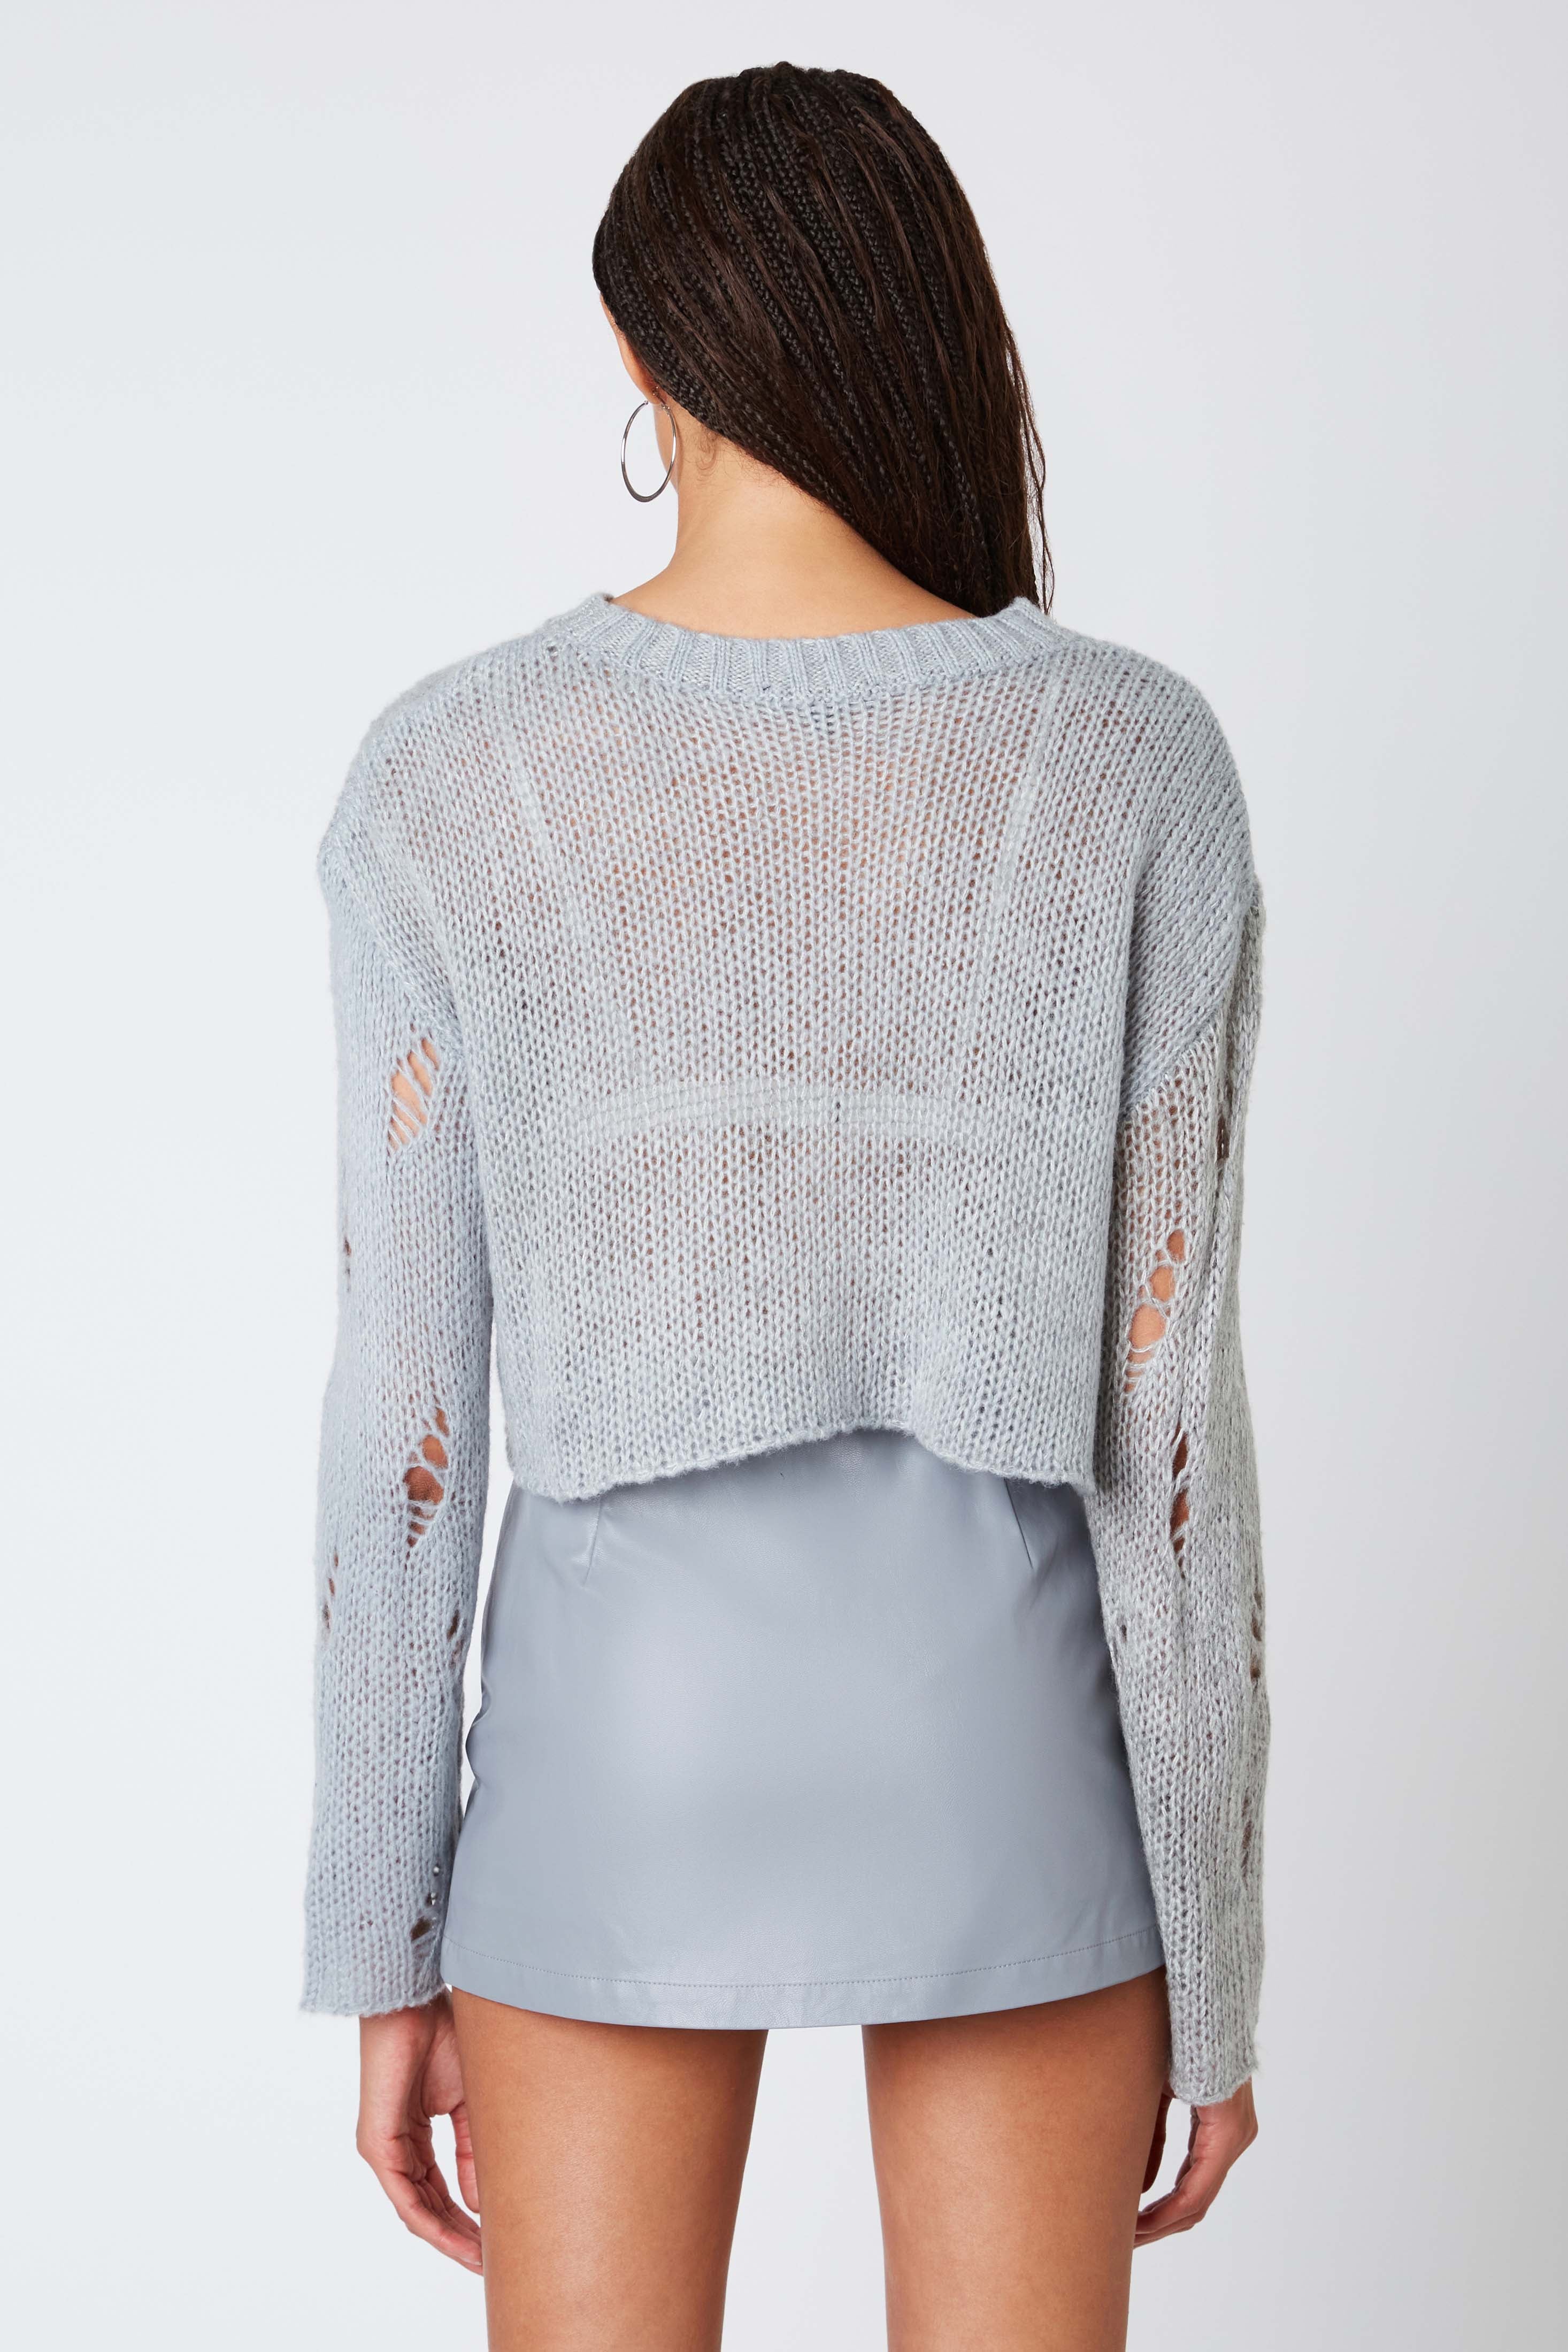 Cropped Knitted Top in Slate Blue Back View